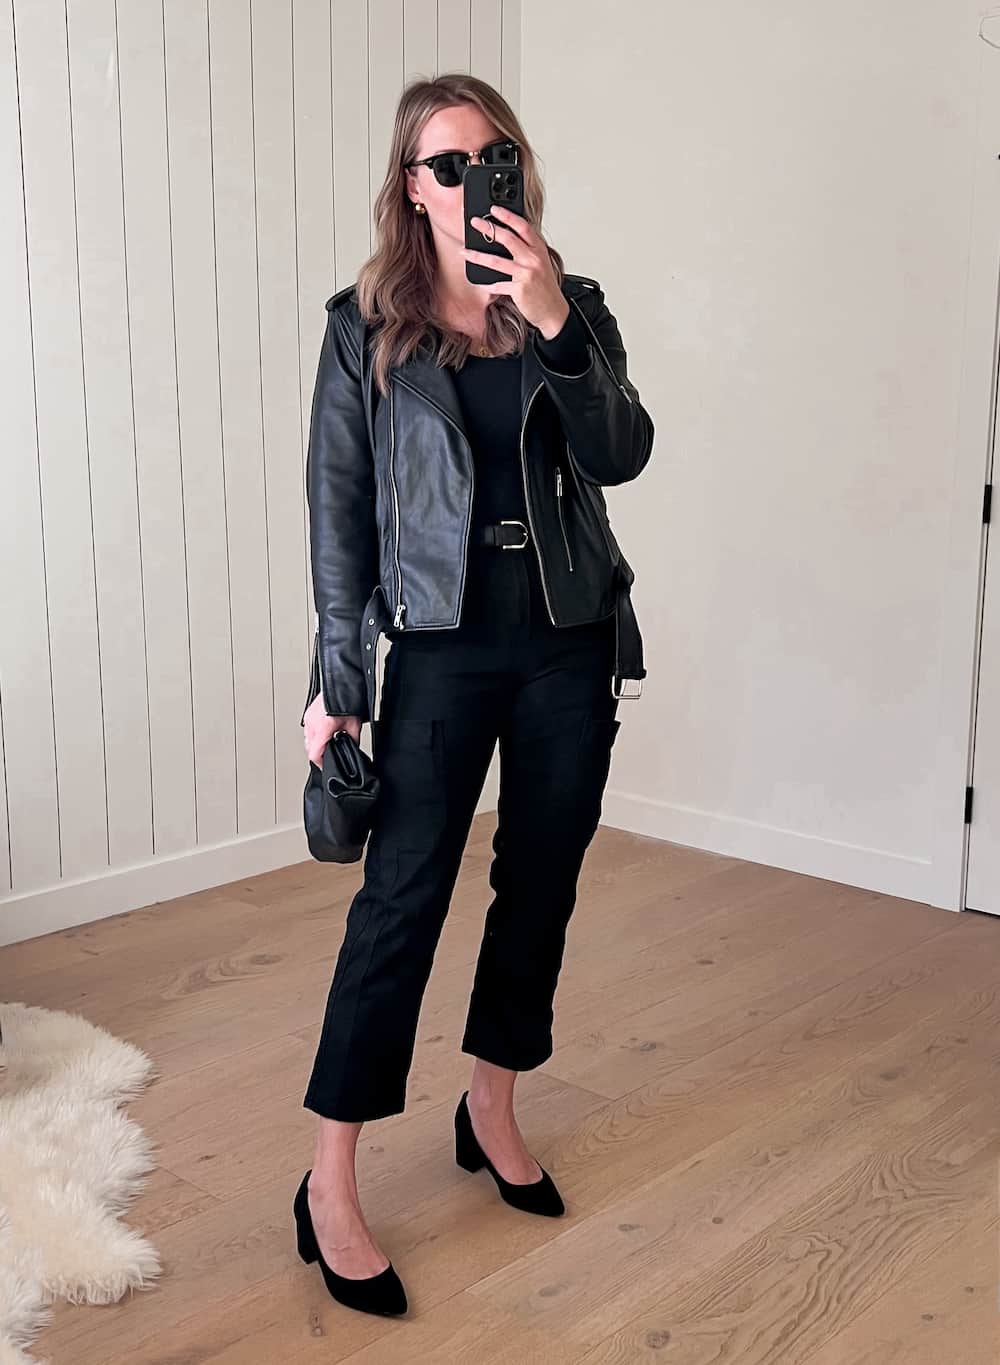 Christal wearing black jeans and a black knit top with a leather jacket and pumps.